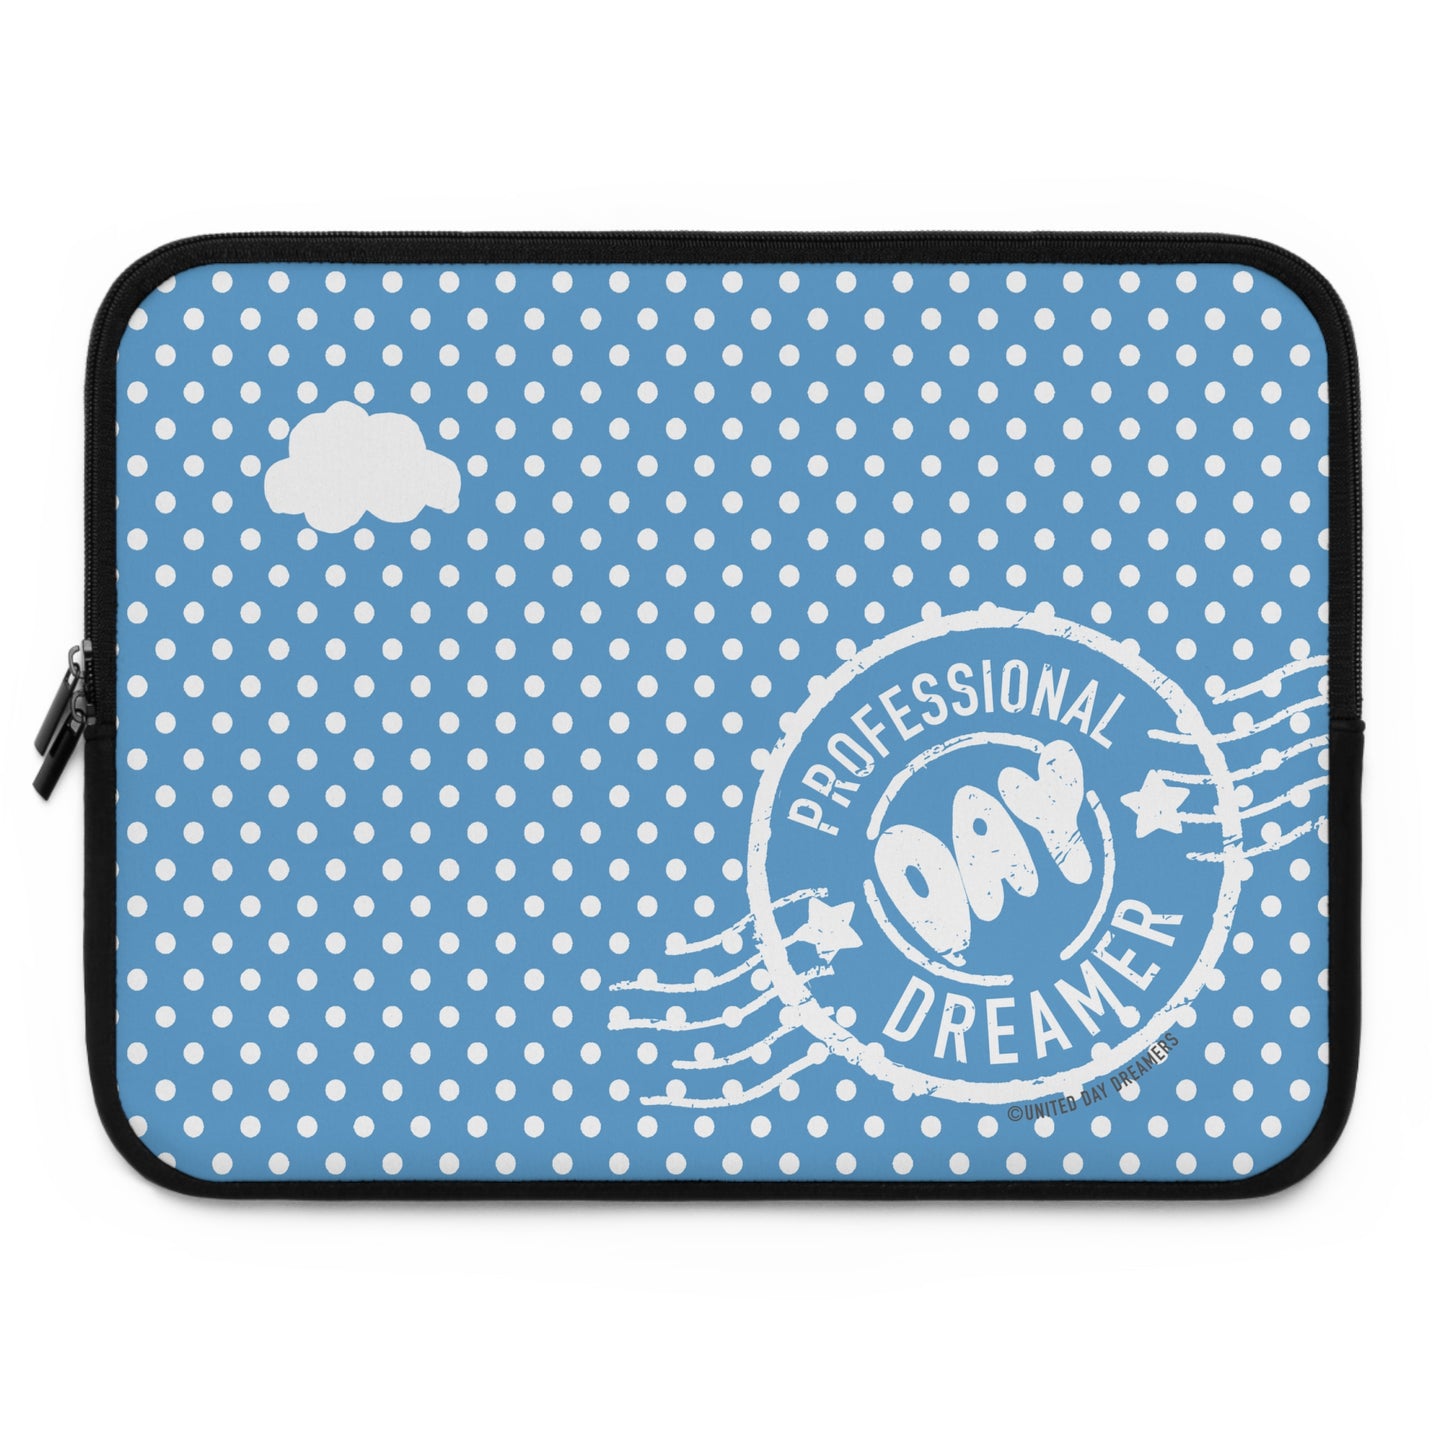 Professional Day Dreamer Laptop Sleeve in Blue